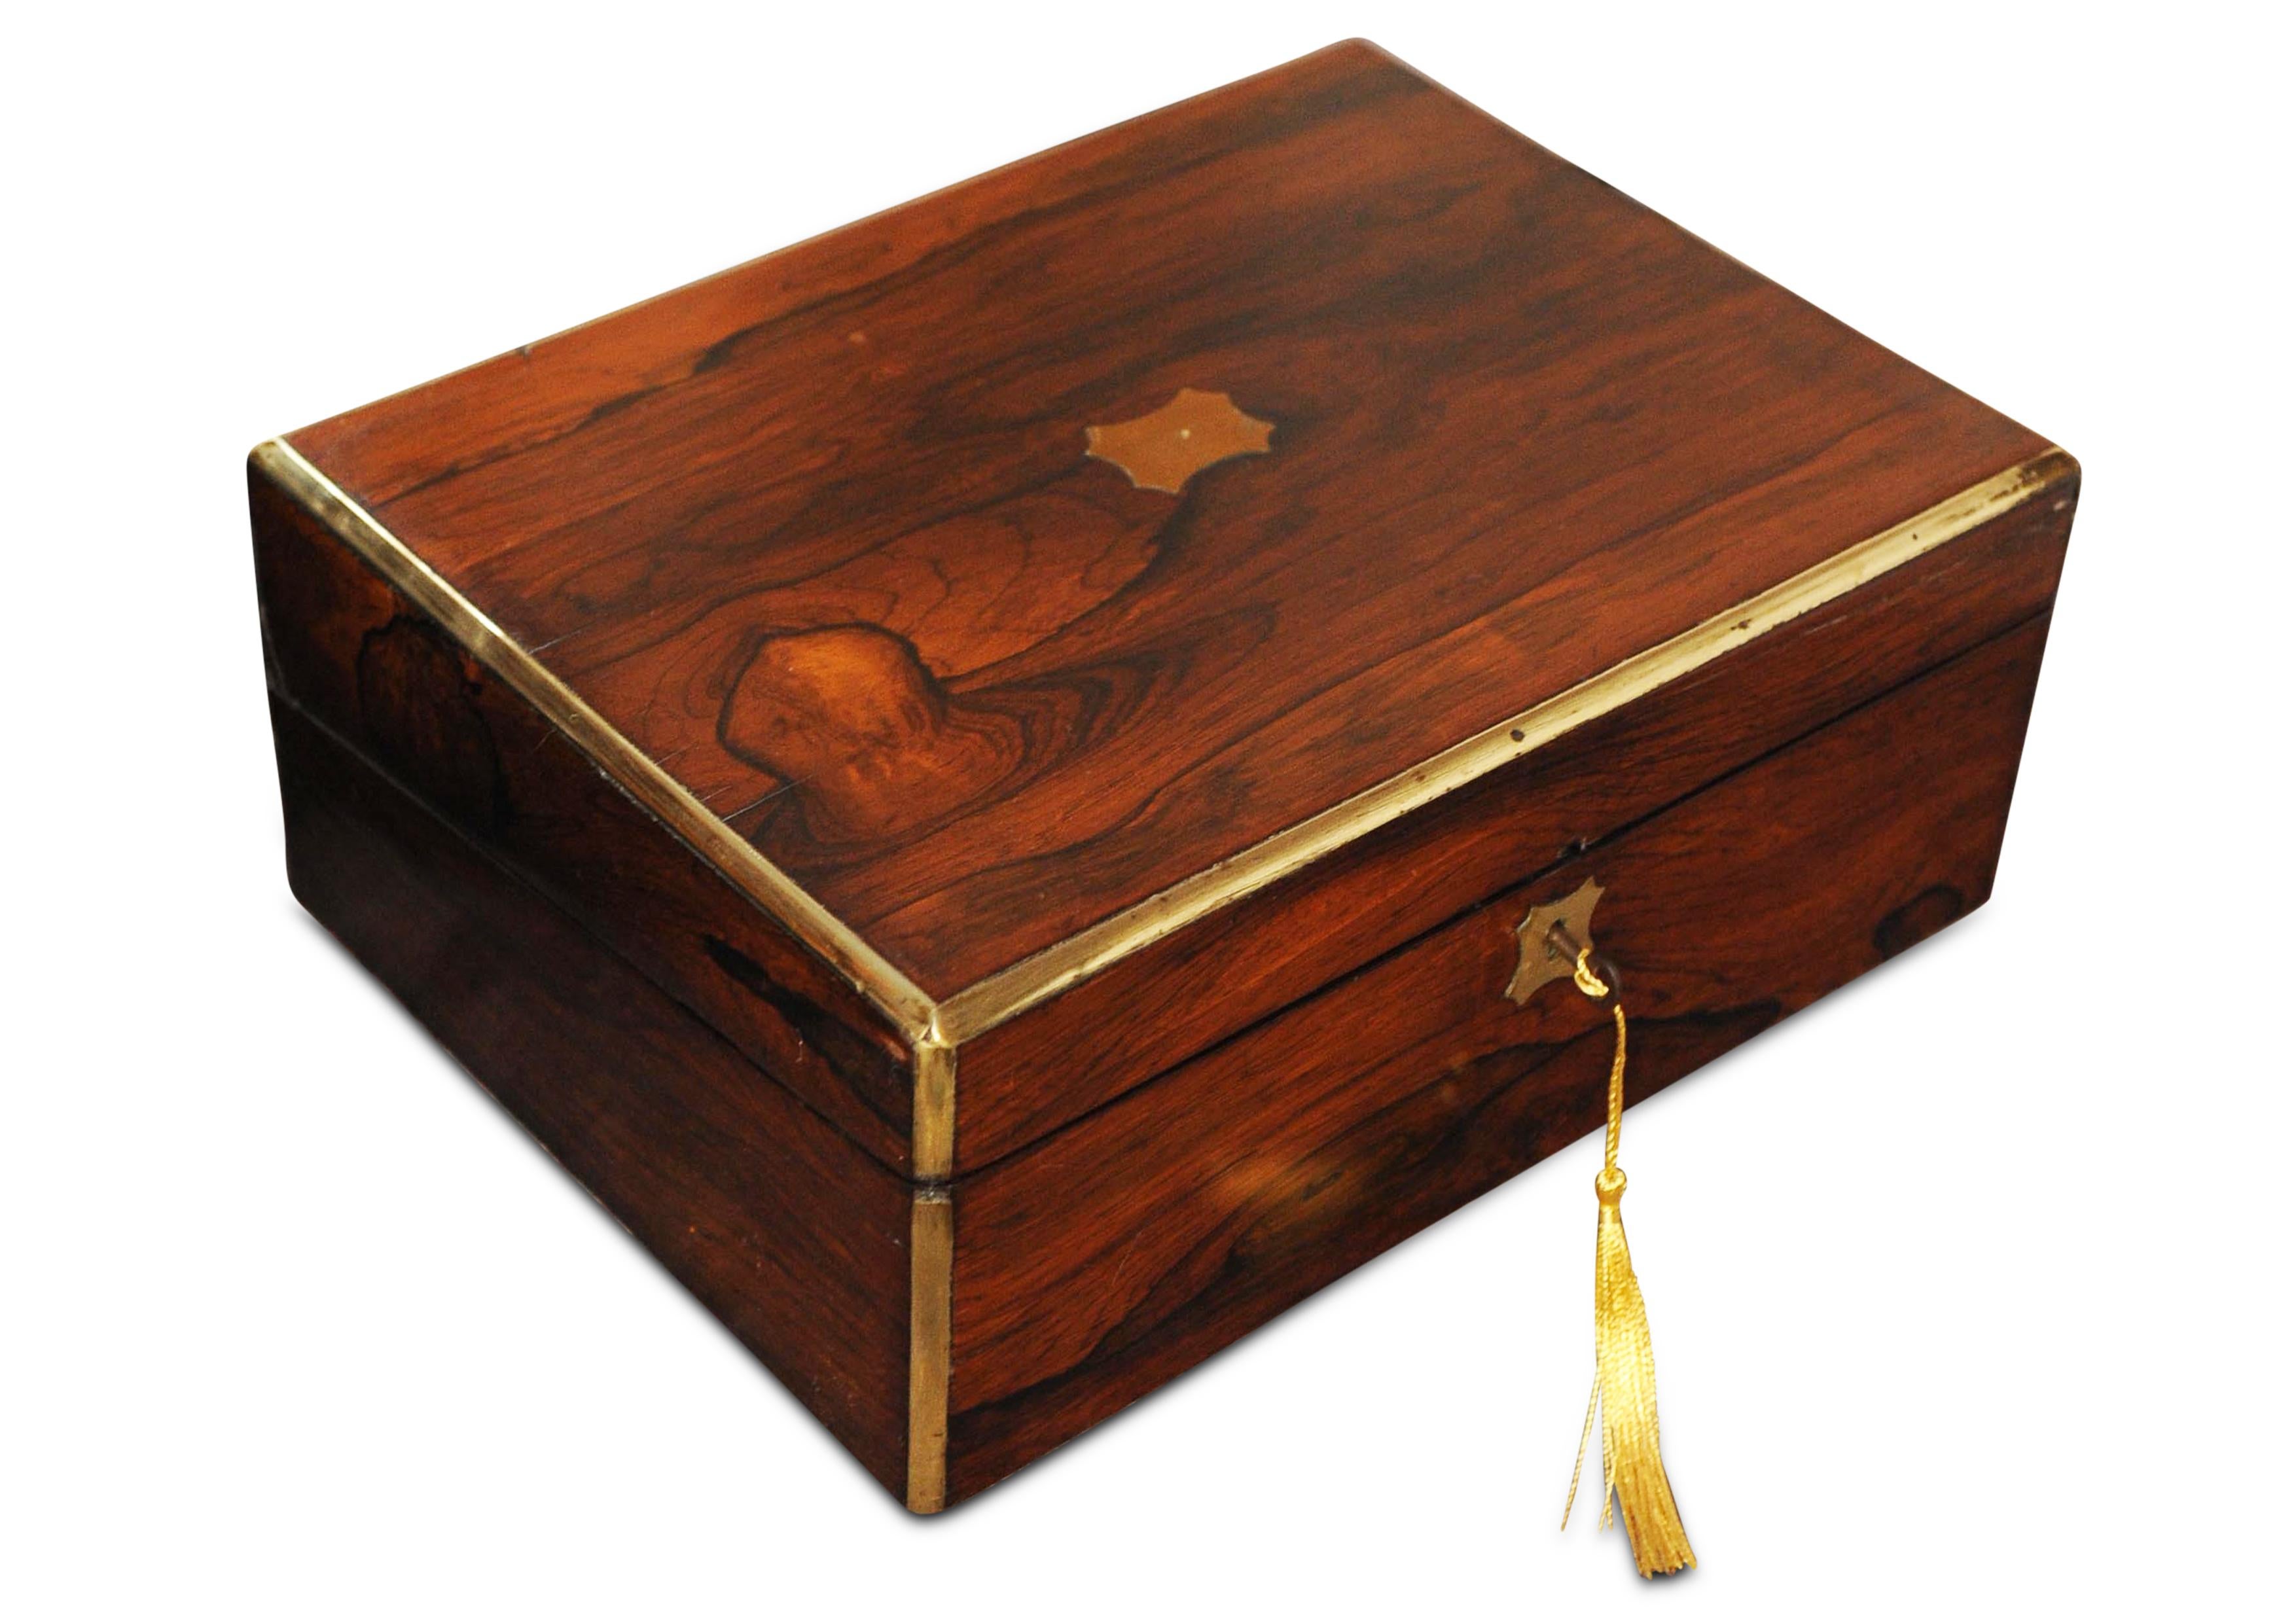 Mid 19th Century Rosewood Brass Bound Hand Crafted Exquisite Writing Slope With Red Velvet  Fitted Interior Befit With A Glass Inkwell, Pad, & Pen 

#21

Would make an ideal gift for the writing enthusiast.
Item will include a brass topped inkwell,